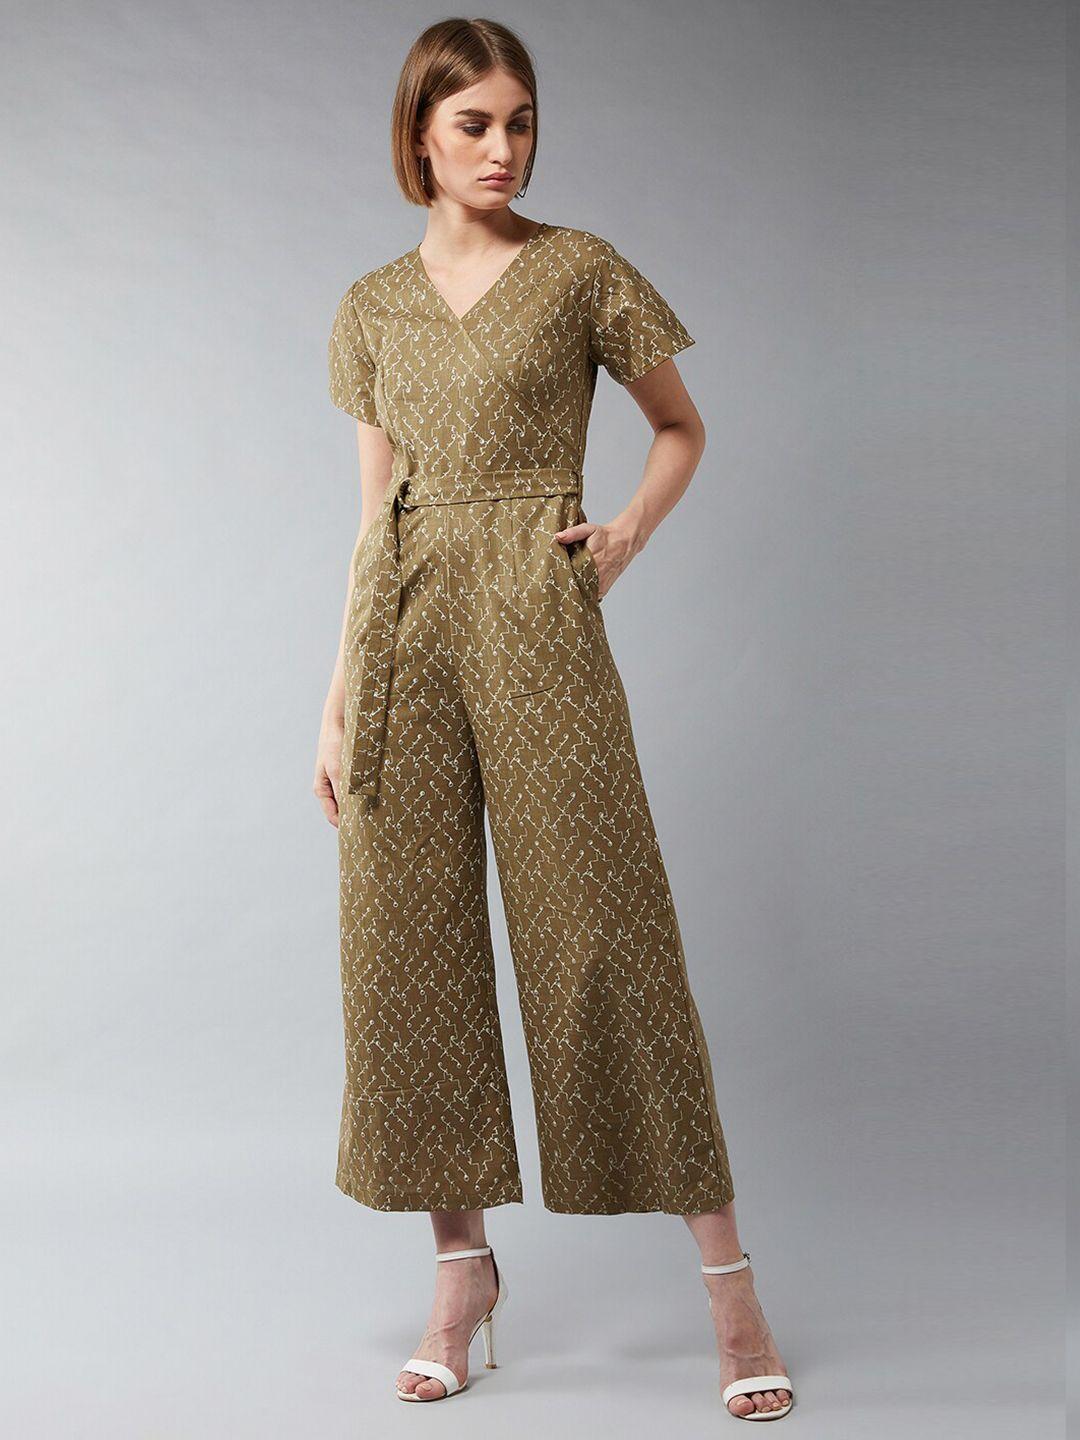 dolce-crudo-women-olive-green-&-white-printed-belted-jumpsuit